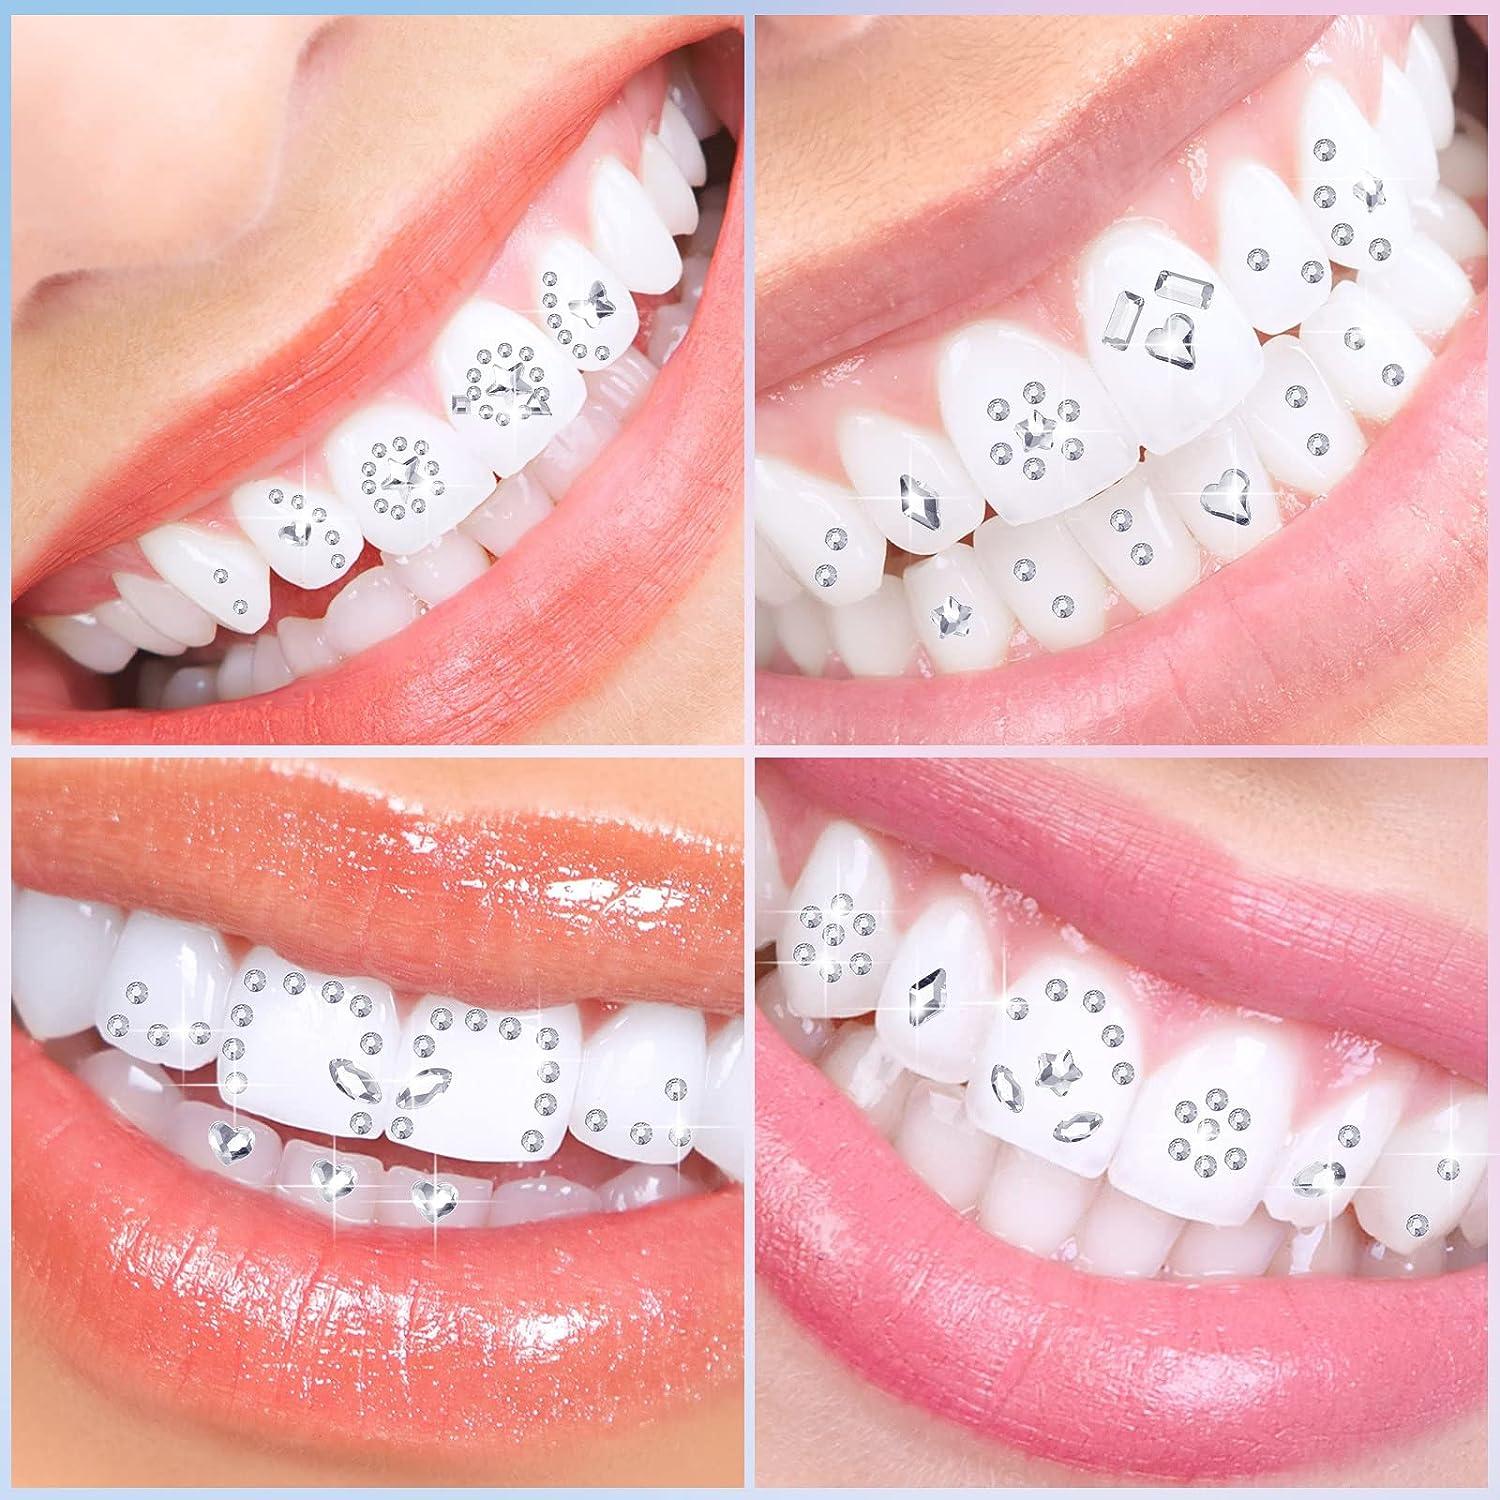 Landhoow 480 Pcs Tooth Gem Kit DIY Teeth Crystals Jewelry Kit Fashionable  Teeth Gems Kit Artificial Crystal Tooth Ornaments for Reflective Teeth